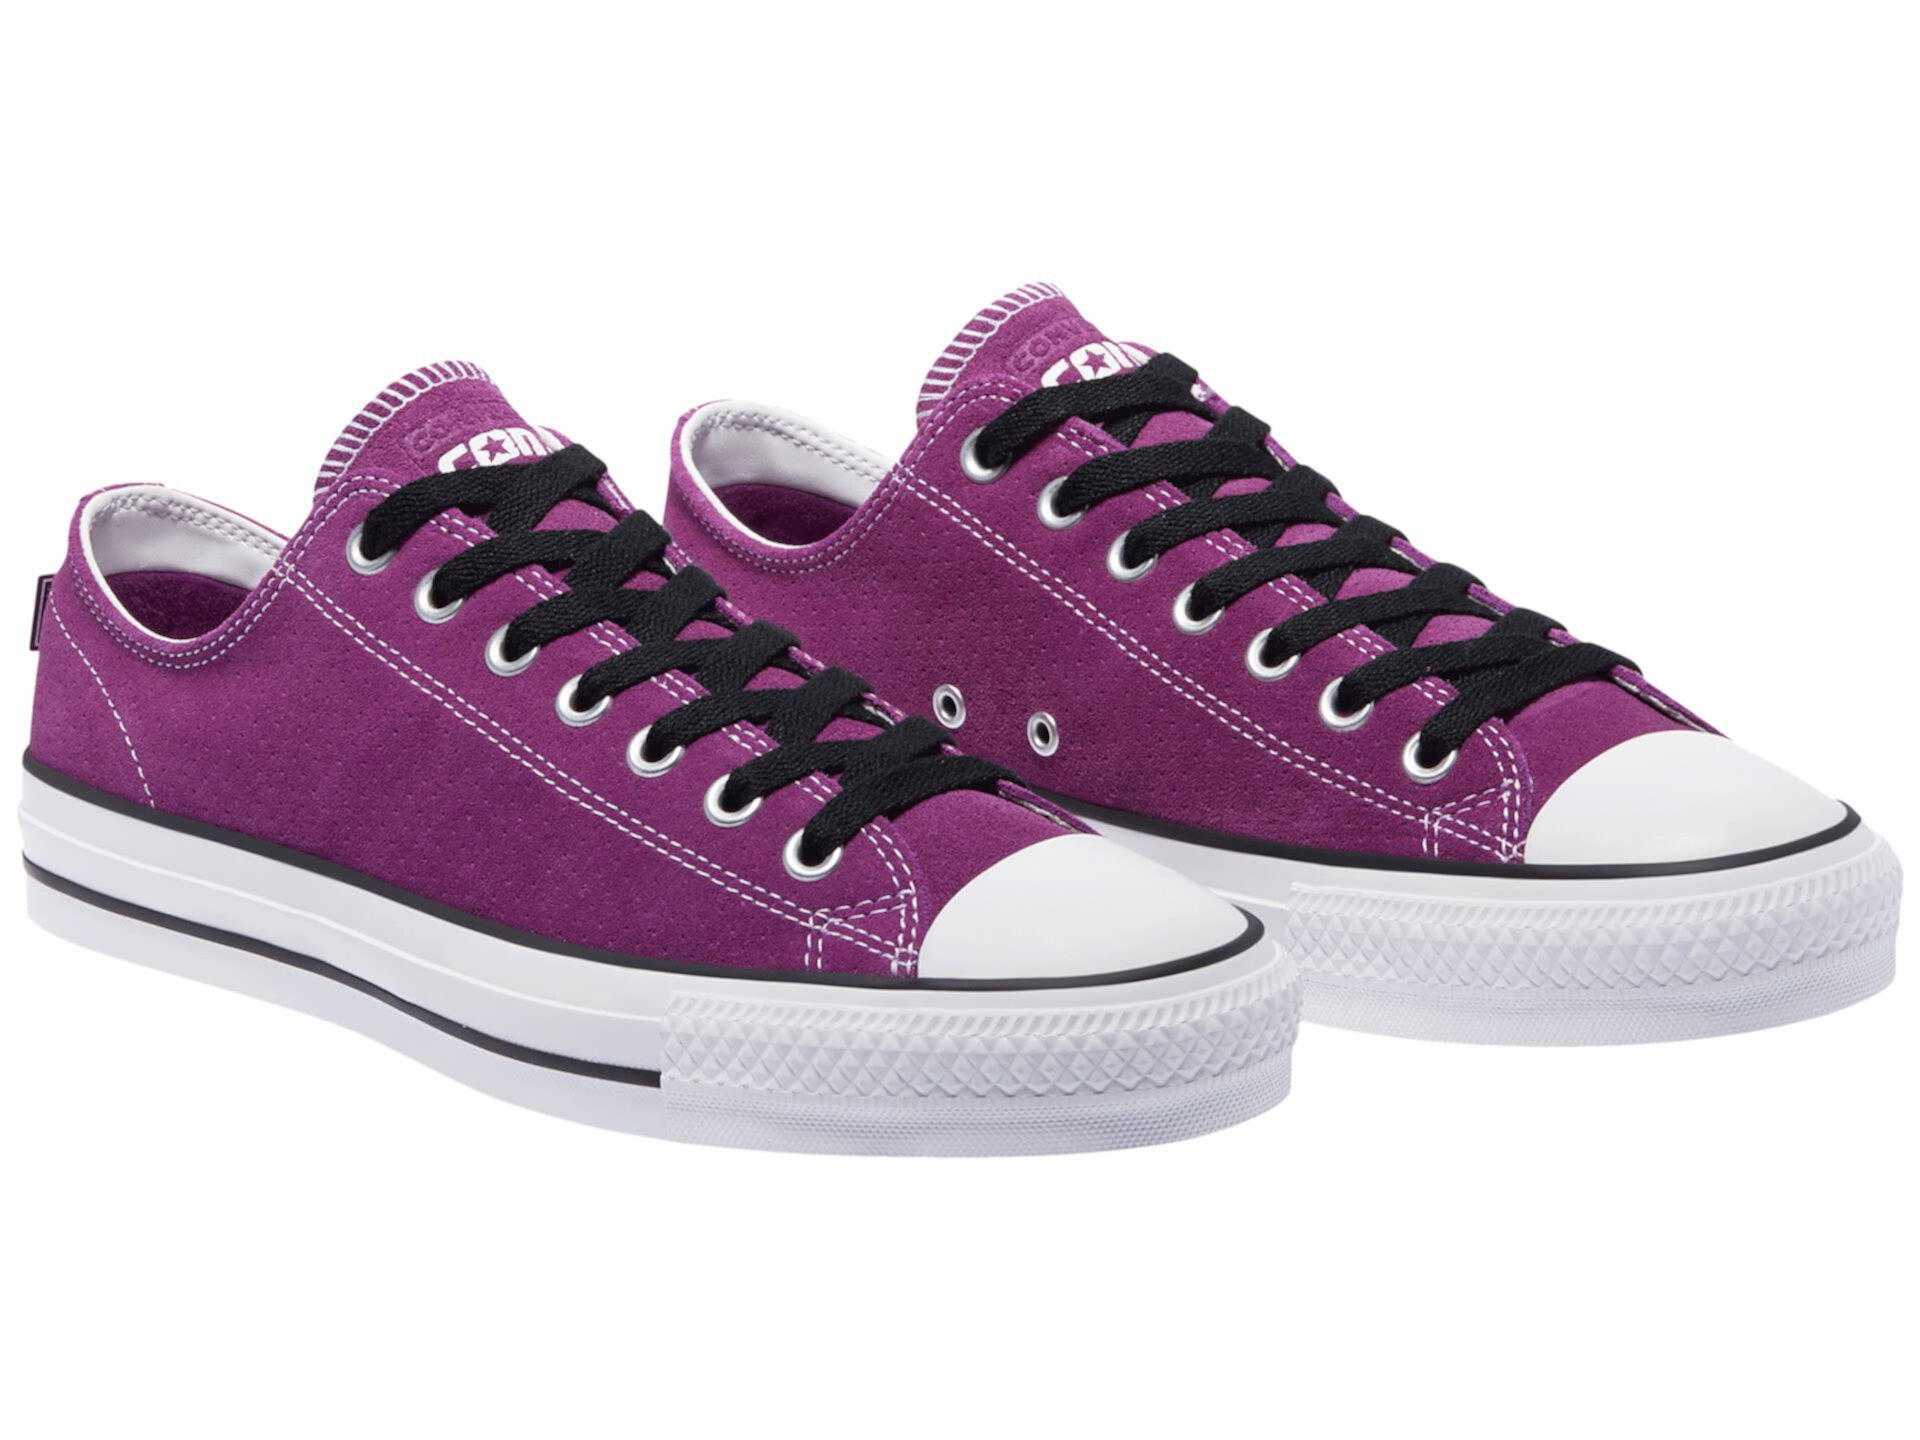 Chuck Taylor All Star Pro Suede Perf Suede - Ox Converse Skate